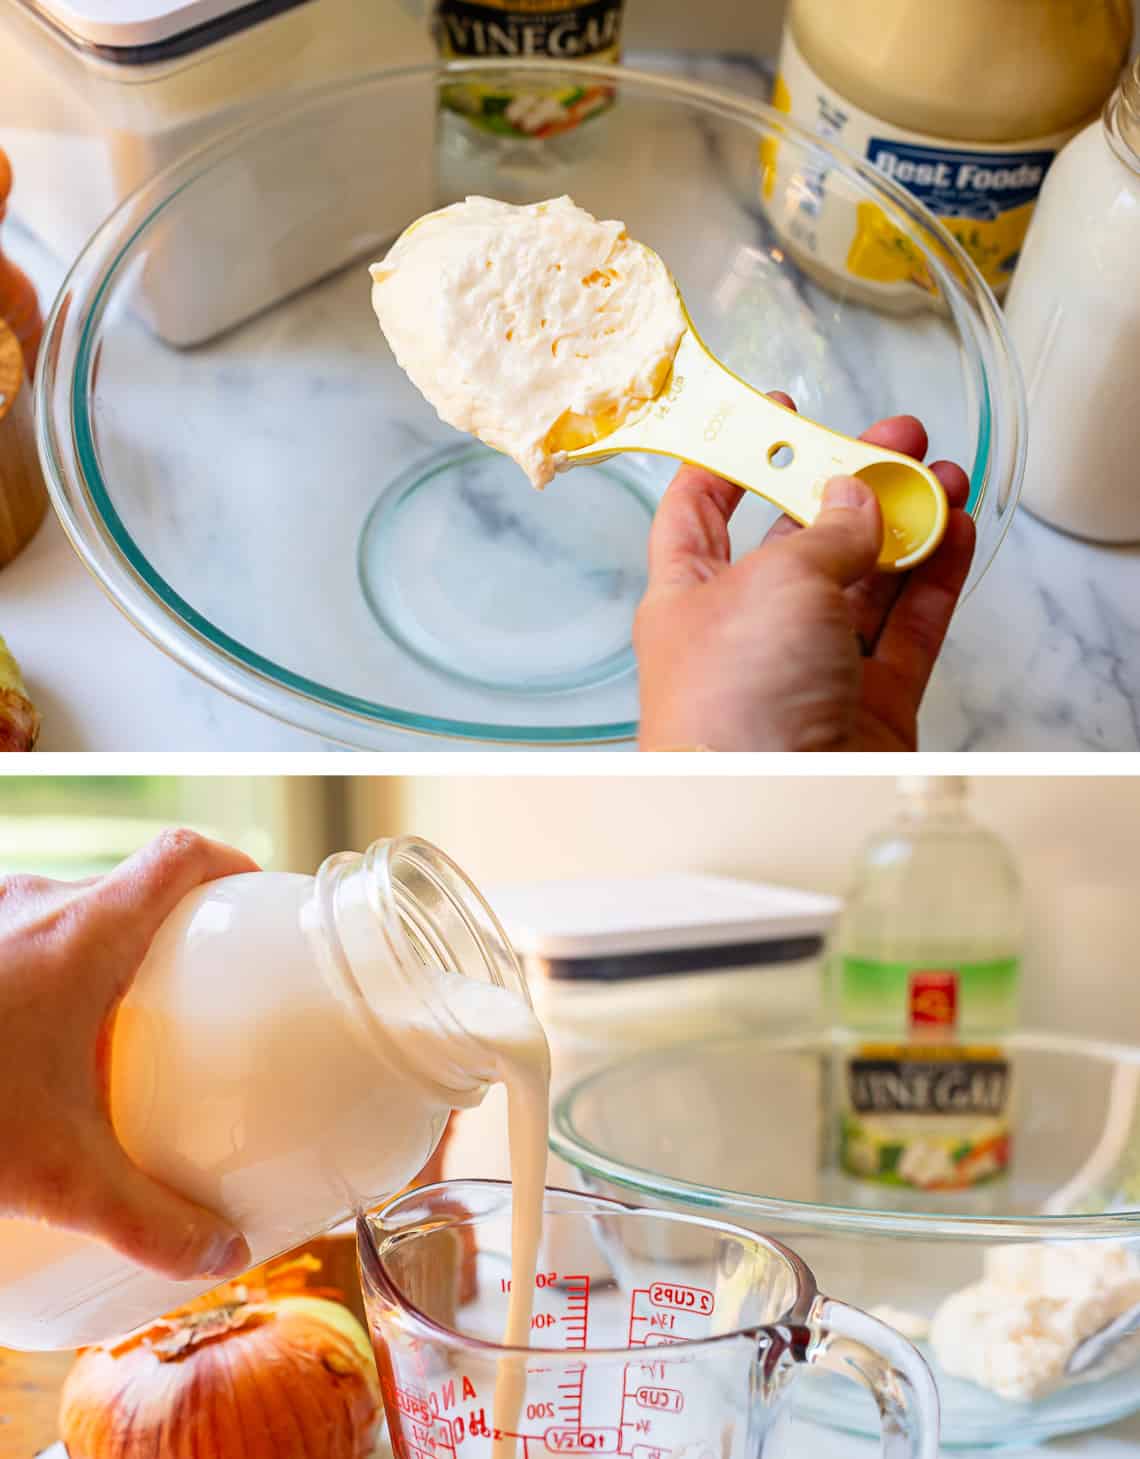 Measuring out mayonnaise and cream for creamy sauce.